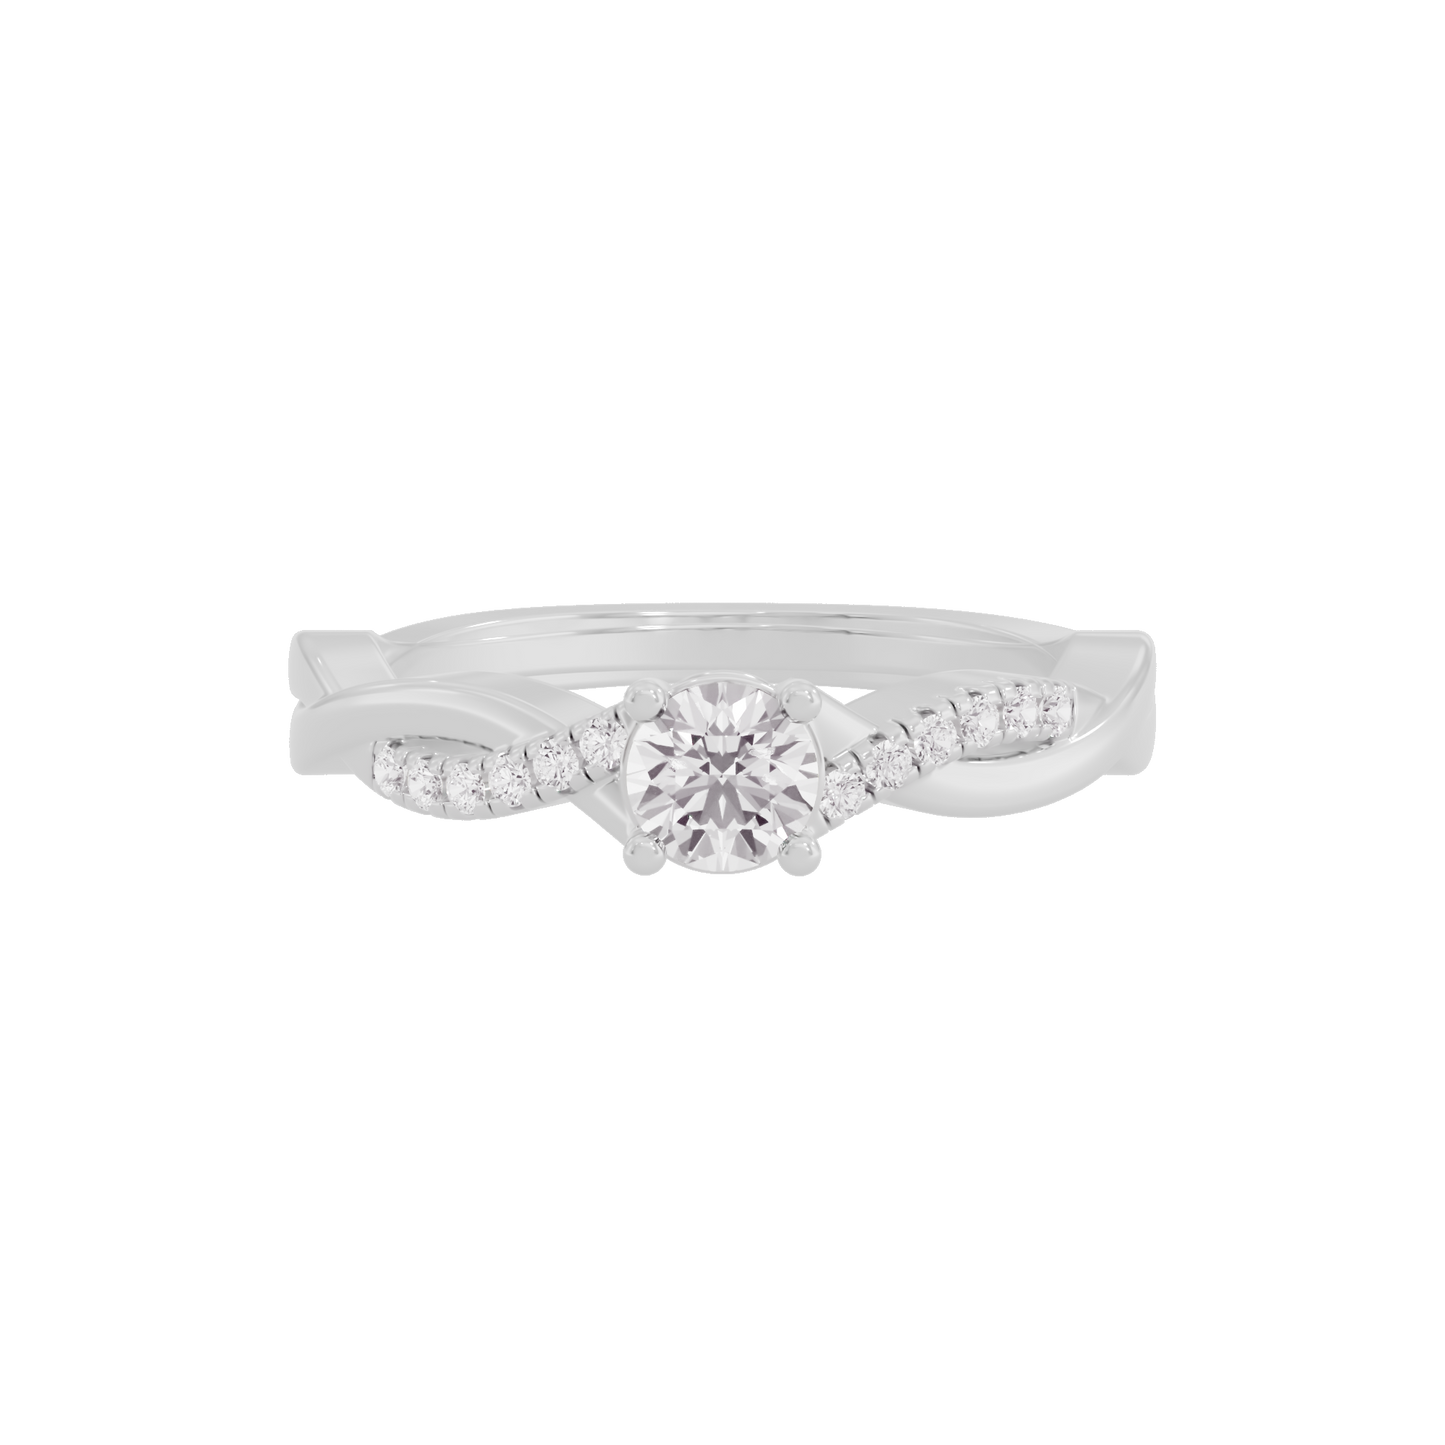 Crowned Crest Diamond Ring